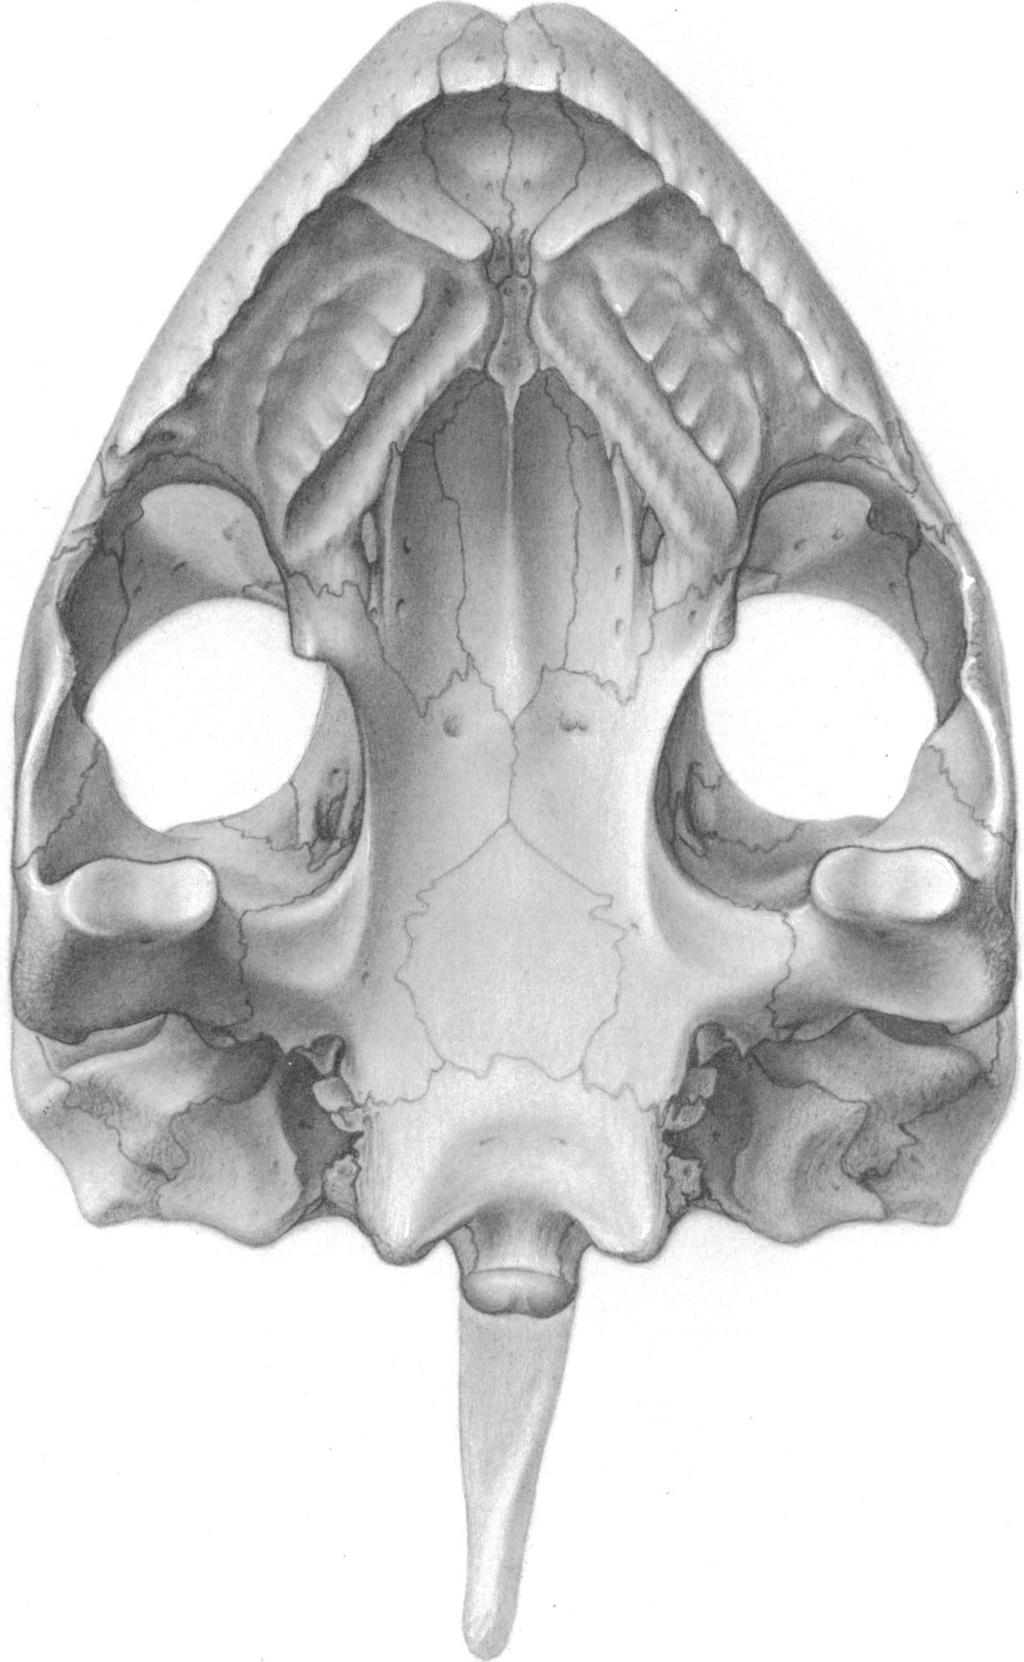 14 AMERICAN MUSEUM NOVITATES NO. 2941 Fig. 7. Skull ofdermatemys in ventral view. Figure is based primarily on USNM 66666 with additions from USNM 66669. somewhat elongate squamosals.